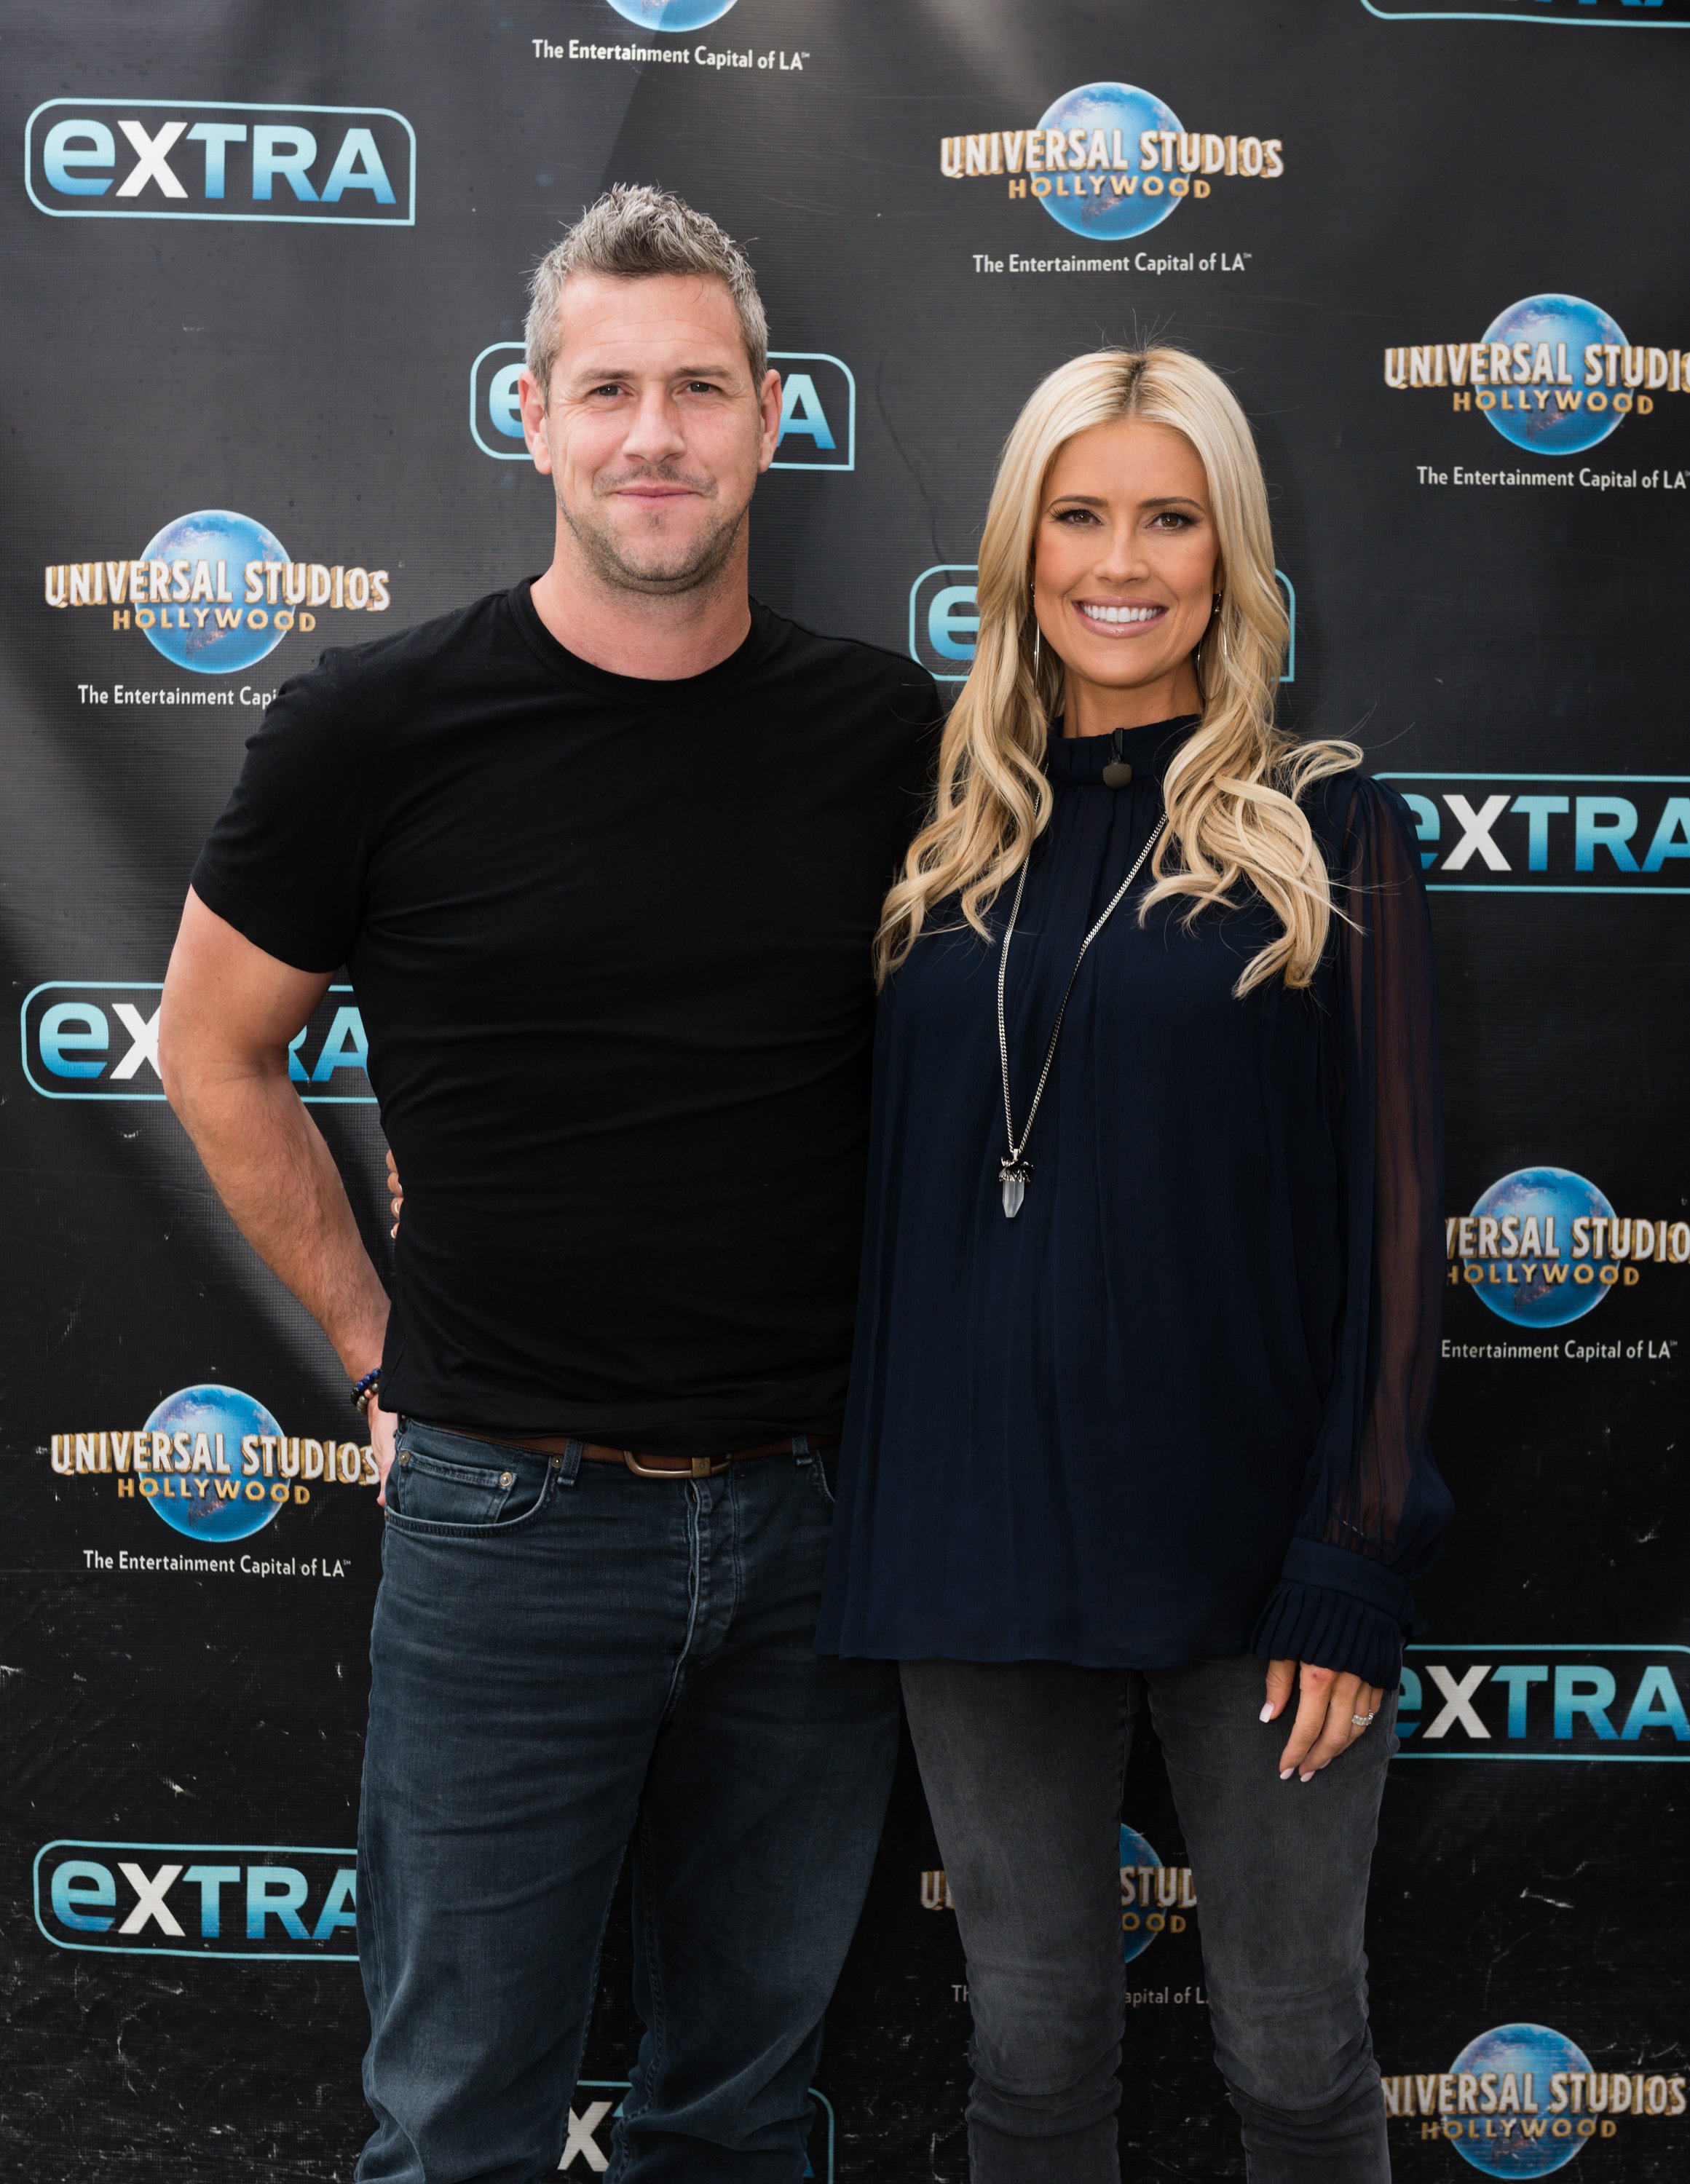 Christina Anstead and Ant Anstead visit "Extra" at Universal Studios Hollywood on May 22, 2019, in Universal City, California. | Source: Getty Images.